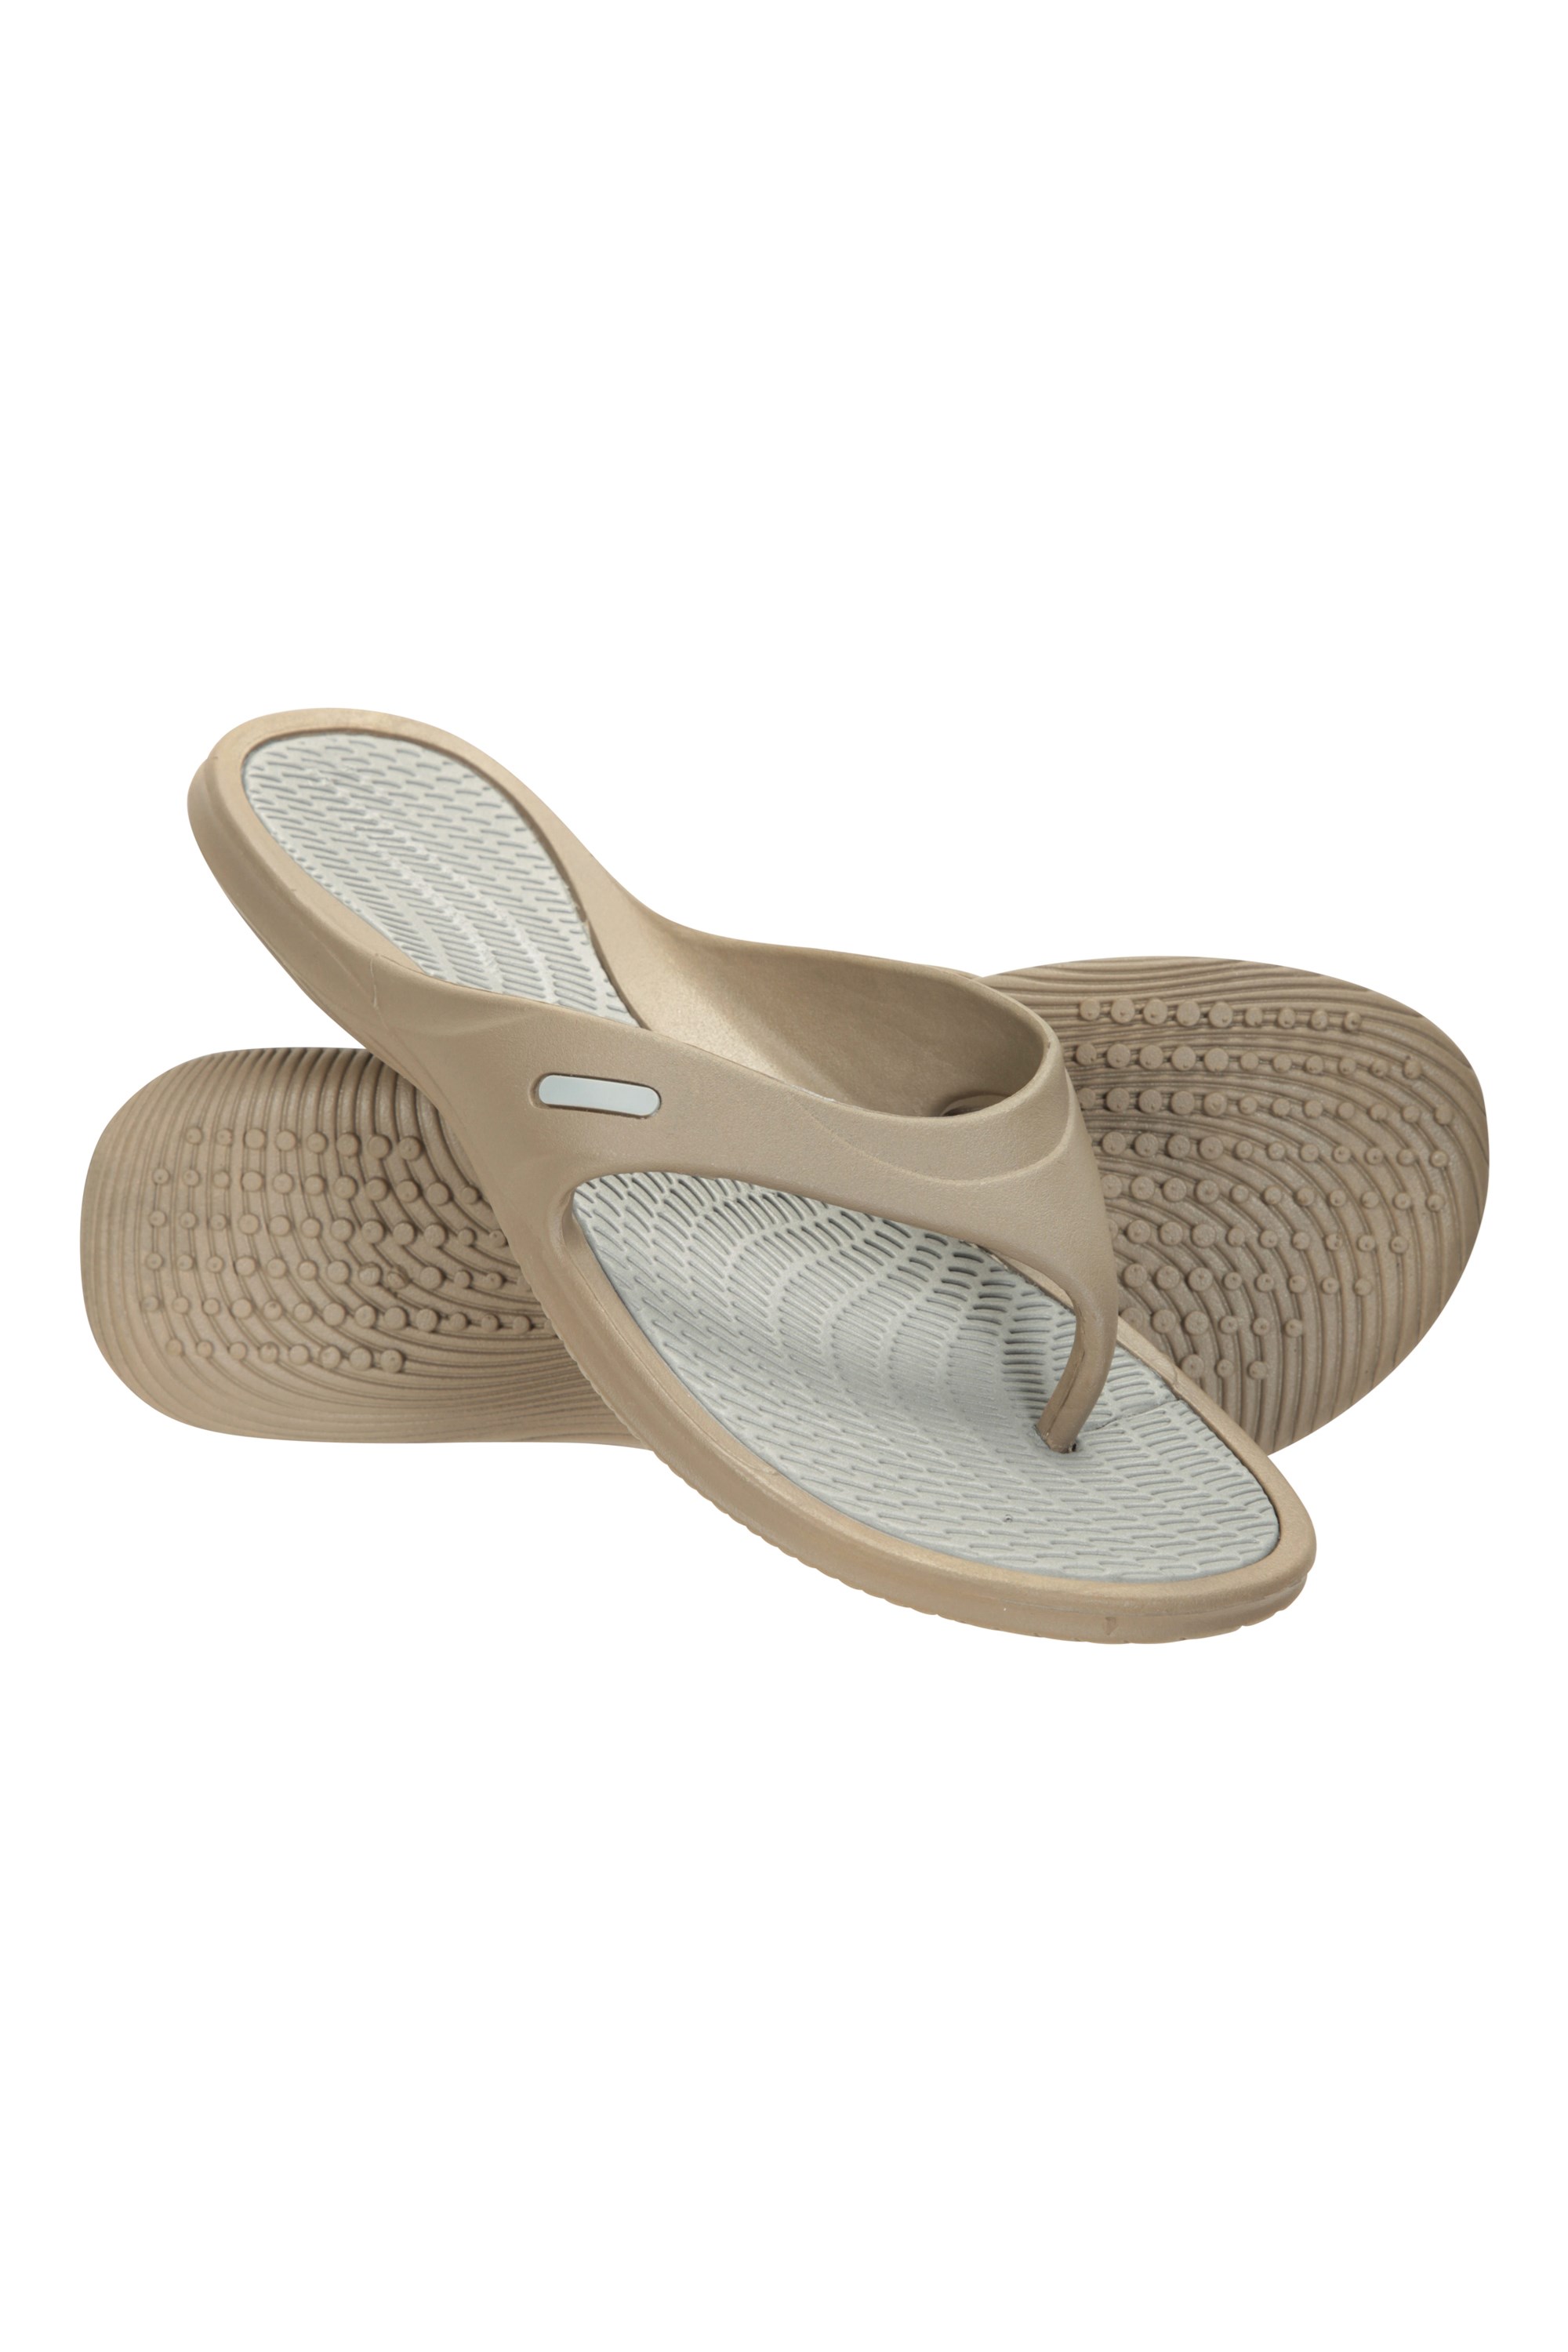 Sandals Flip Flops By Rampage Size: 7.5 – Clothes Mentor Sylvania OH #127